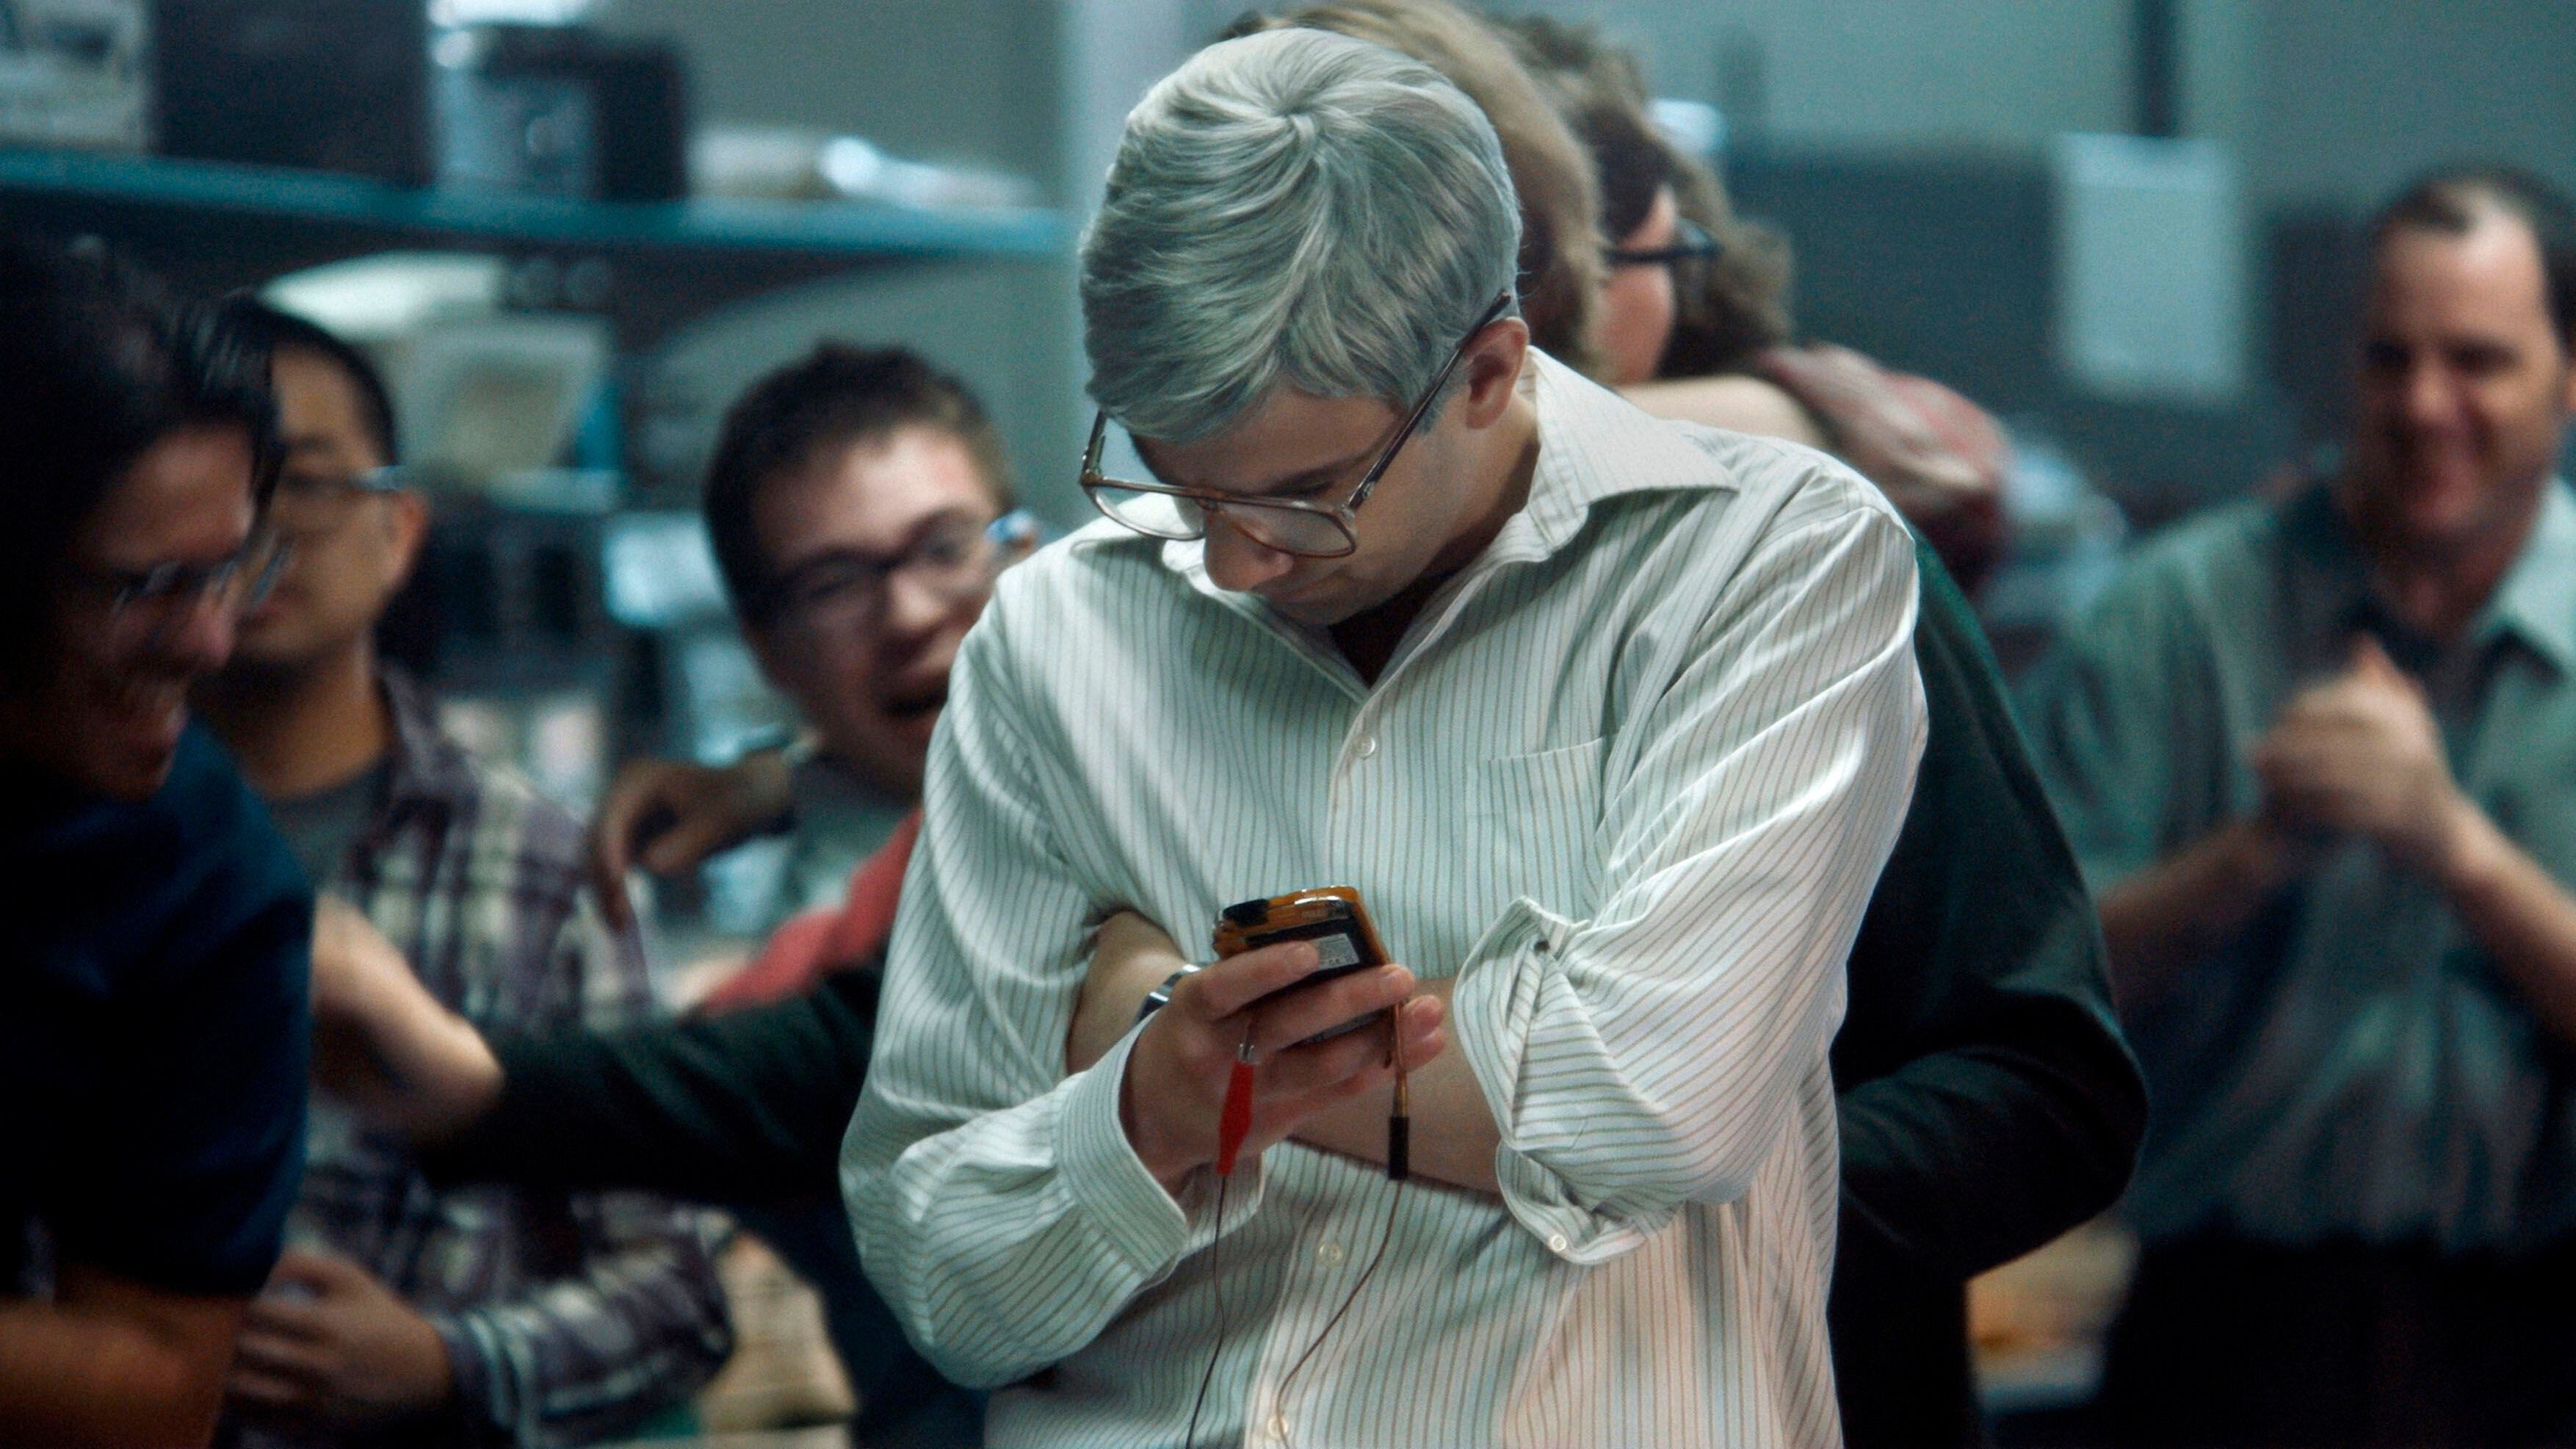 A grey-haired man with glasses closely examines a prototype cell phone